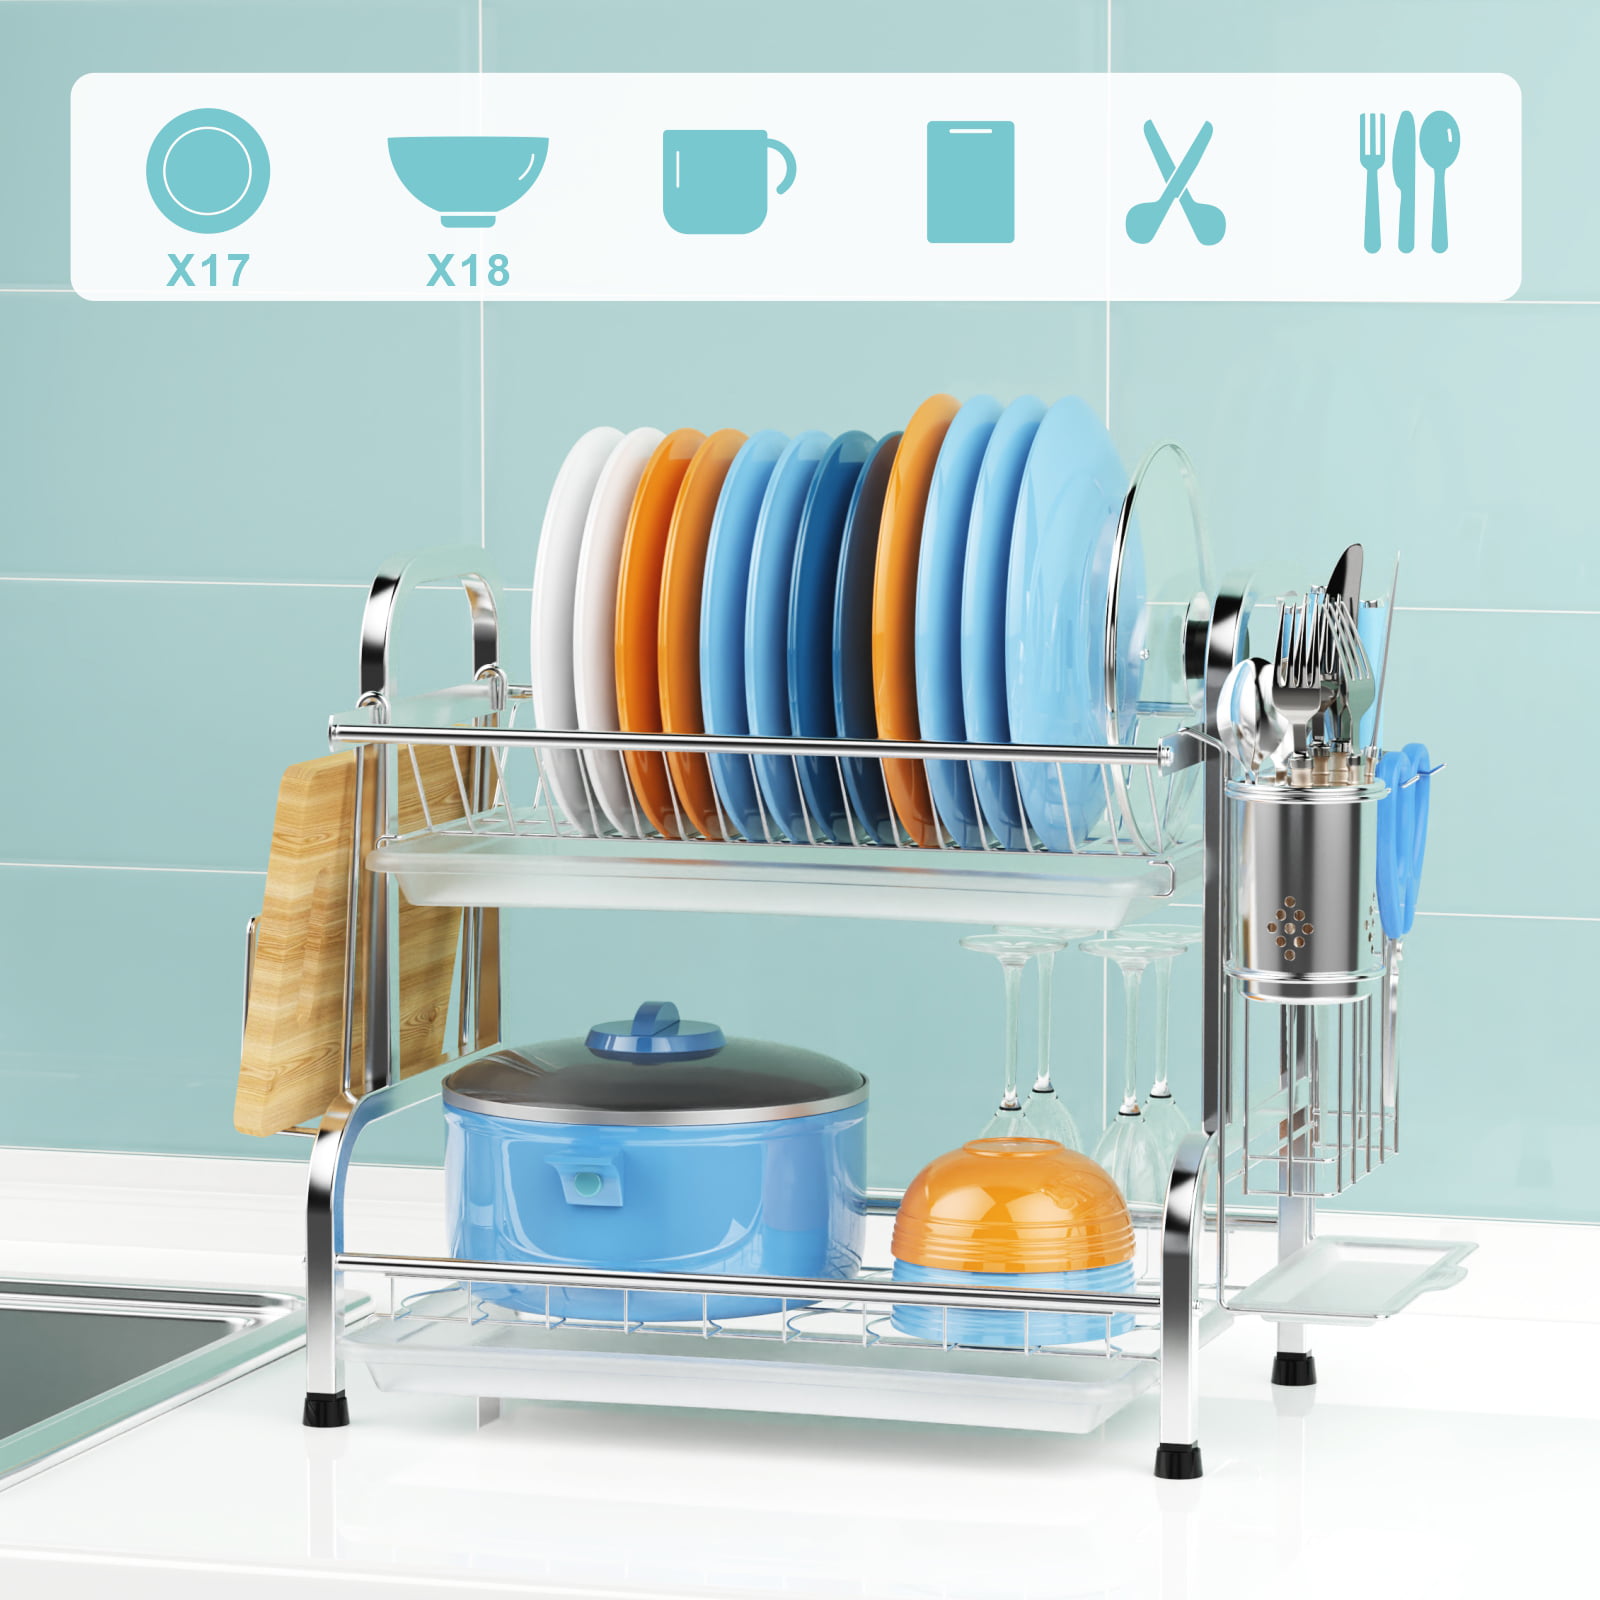 AKaSping Dish Drying Rack Drainboard Set 2 Tier Kitchen Dish Rack with Lid  Cover Plastic Small Utensil Holder Rack for Kitchen Plate Cup Dish Storage